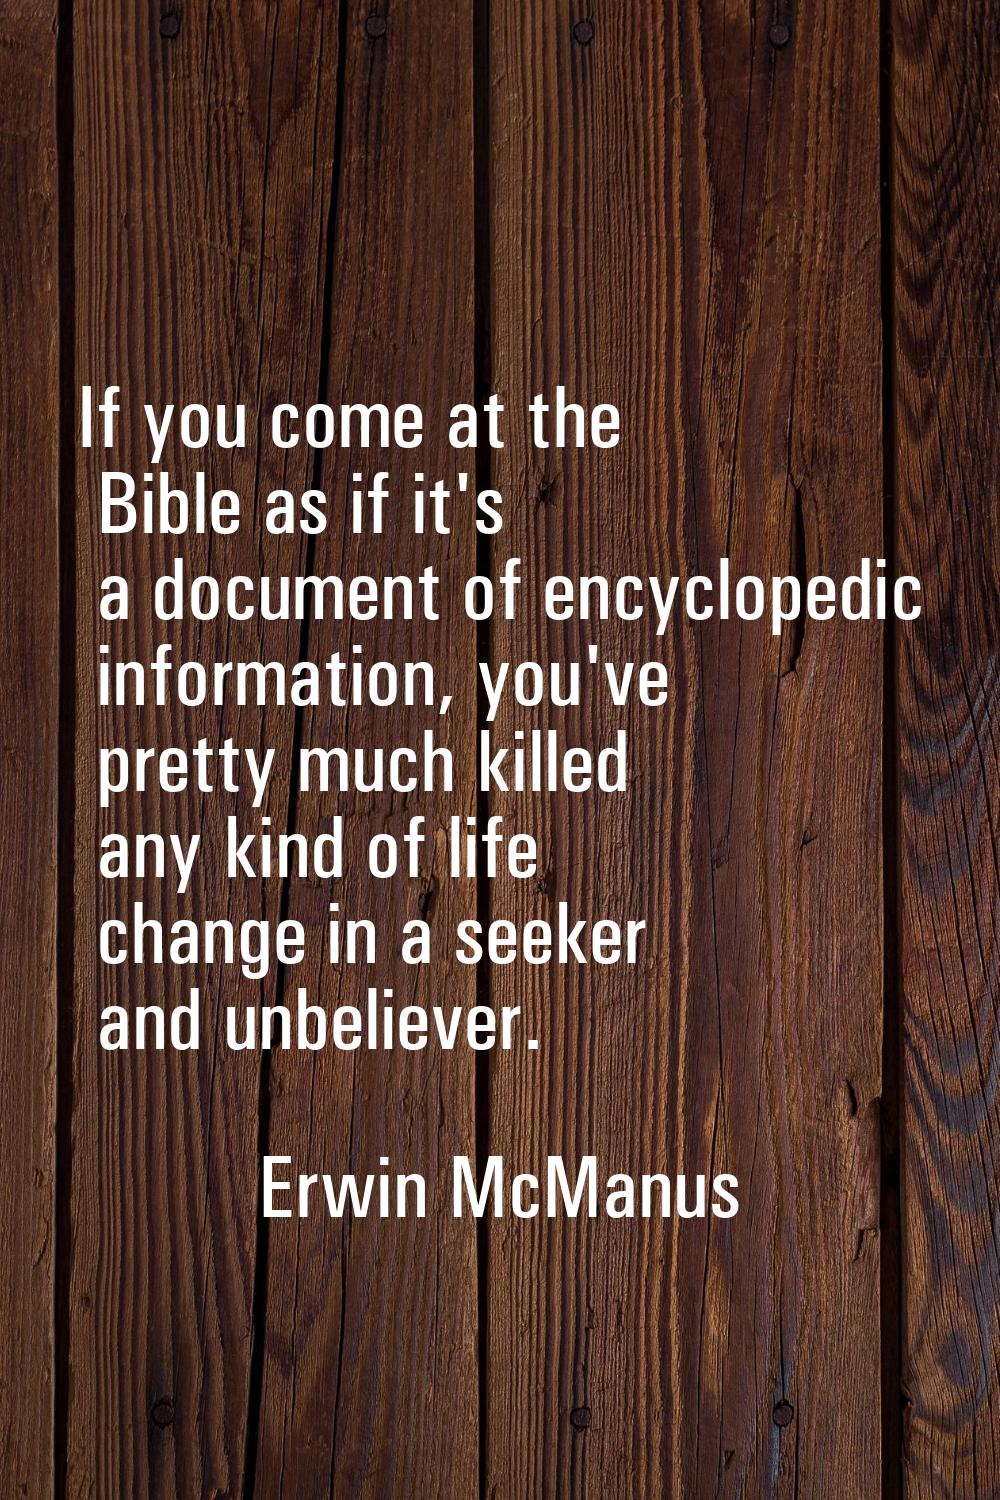 If you come at the Bible as if it's a document of encyclopedic information, you've pretty much kill